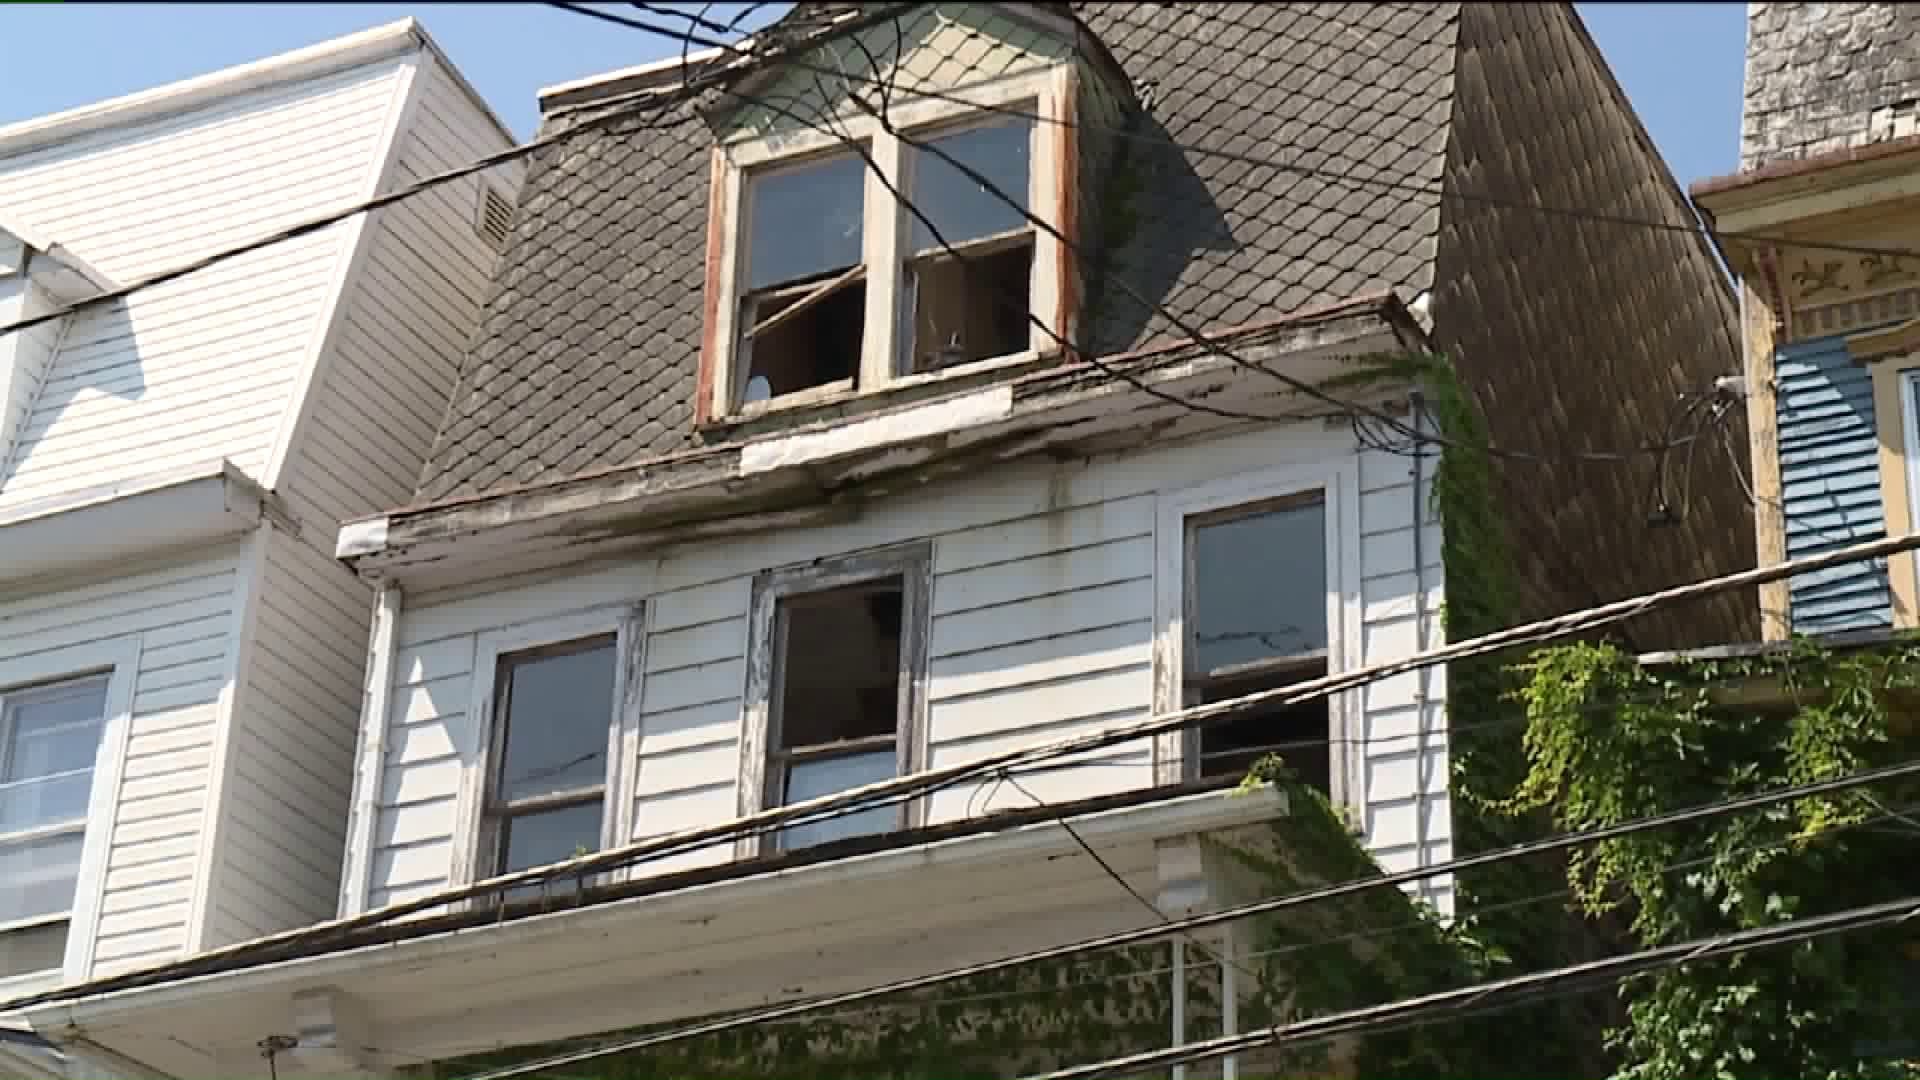 National Guard Boards Up Blighted Properties in Pottsville